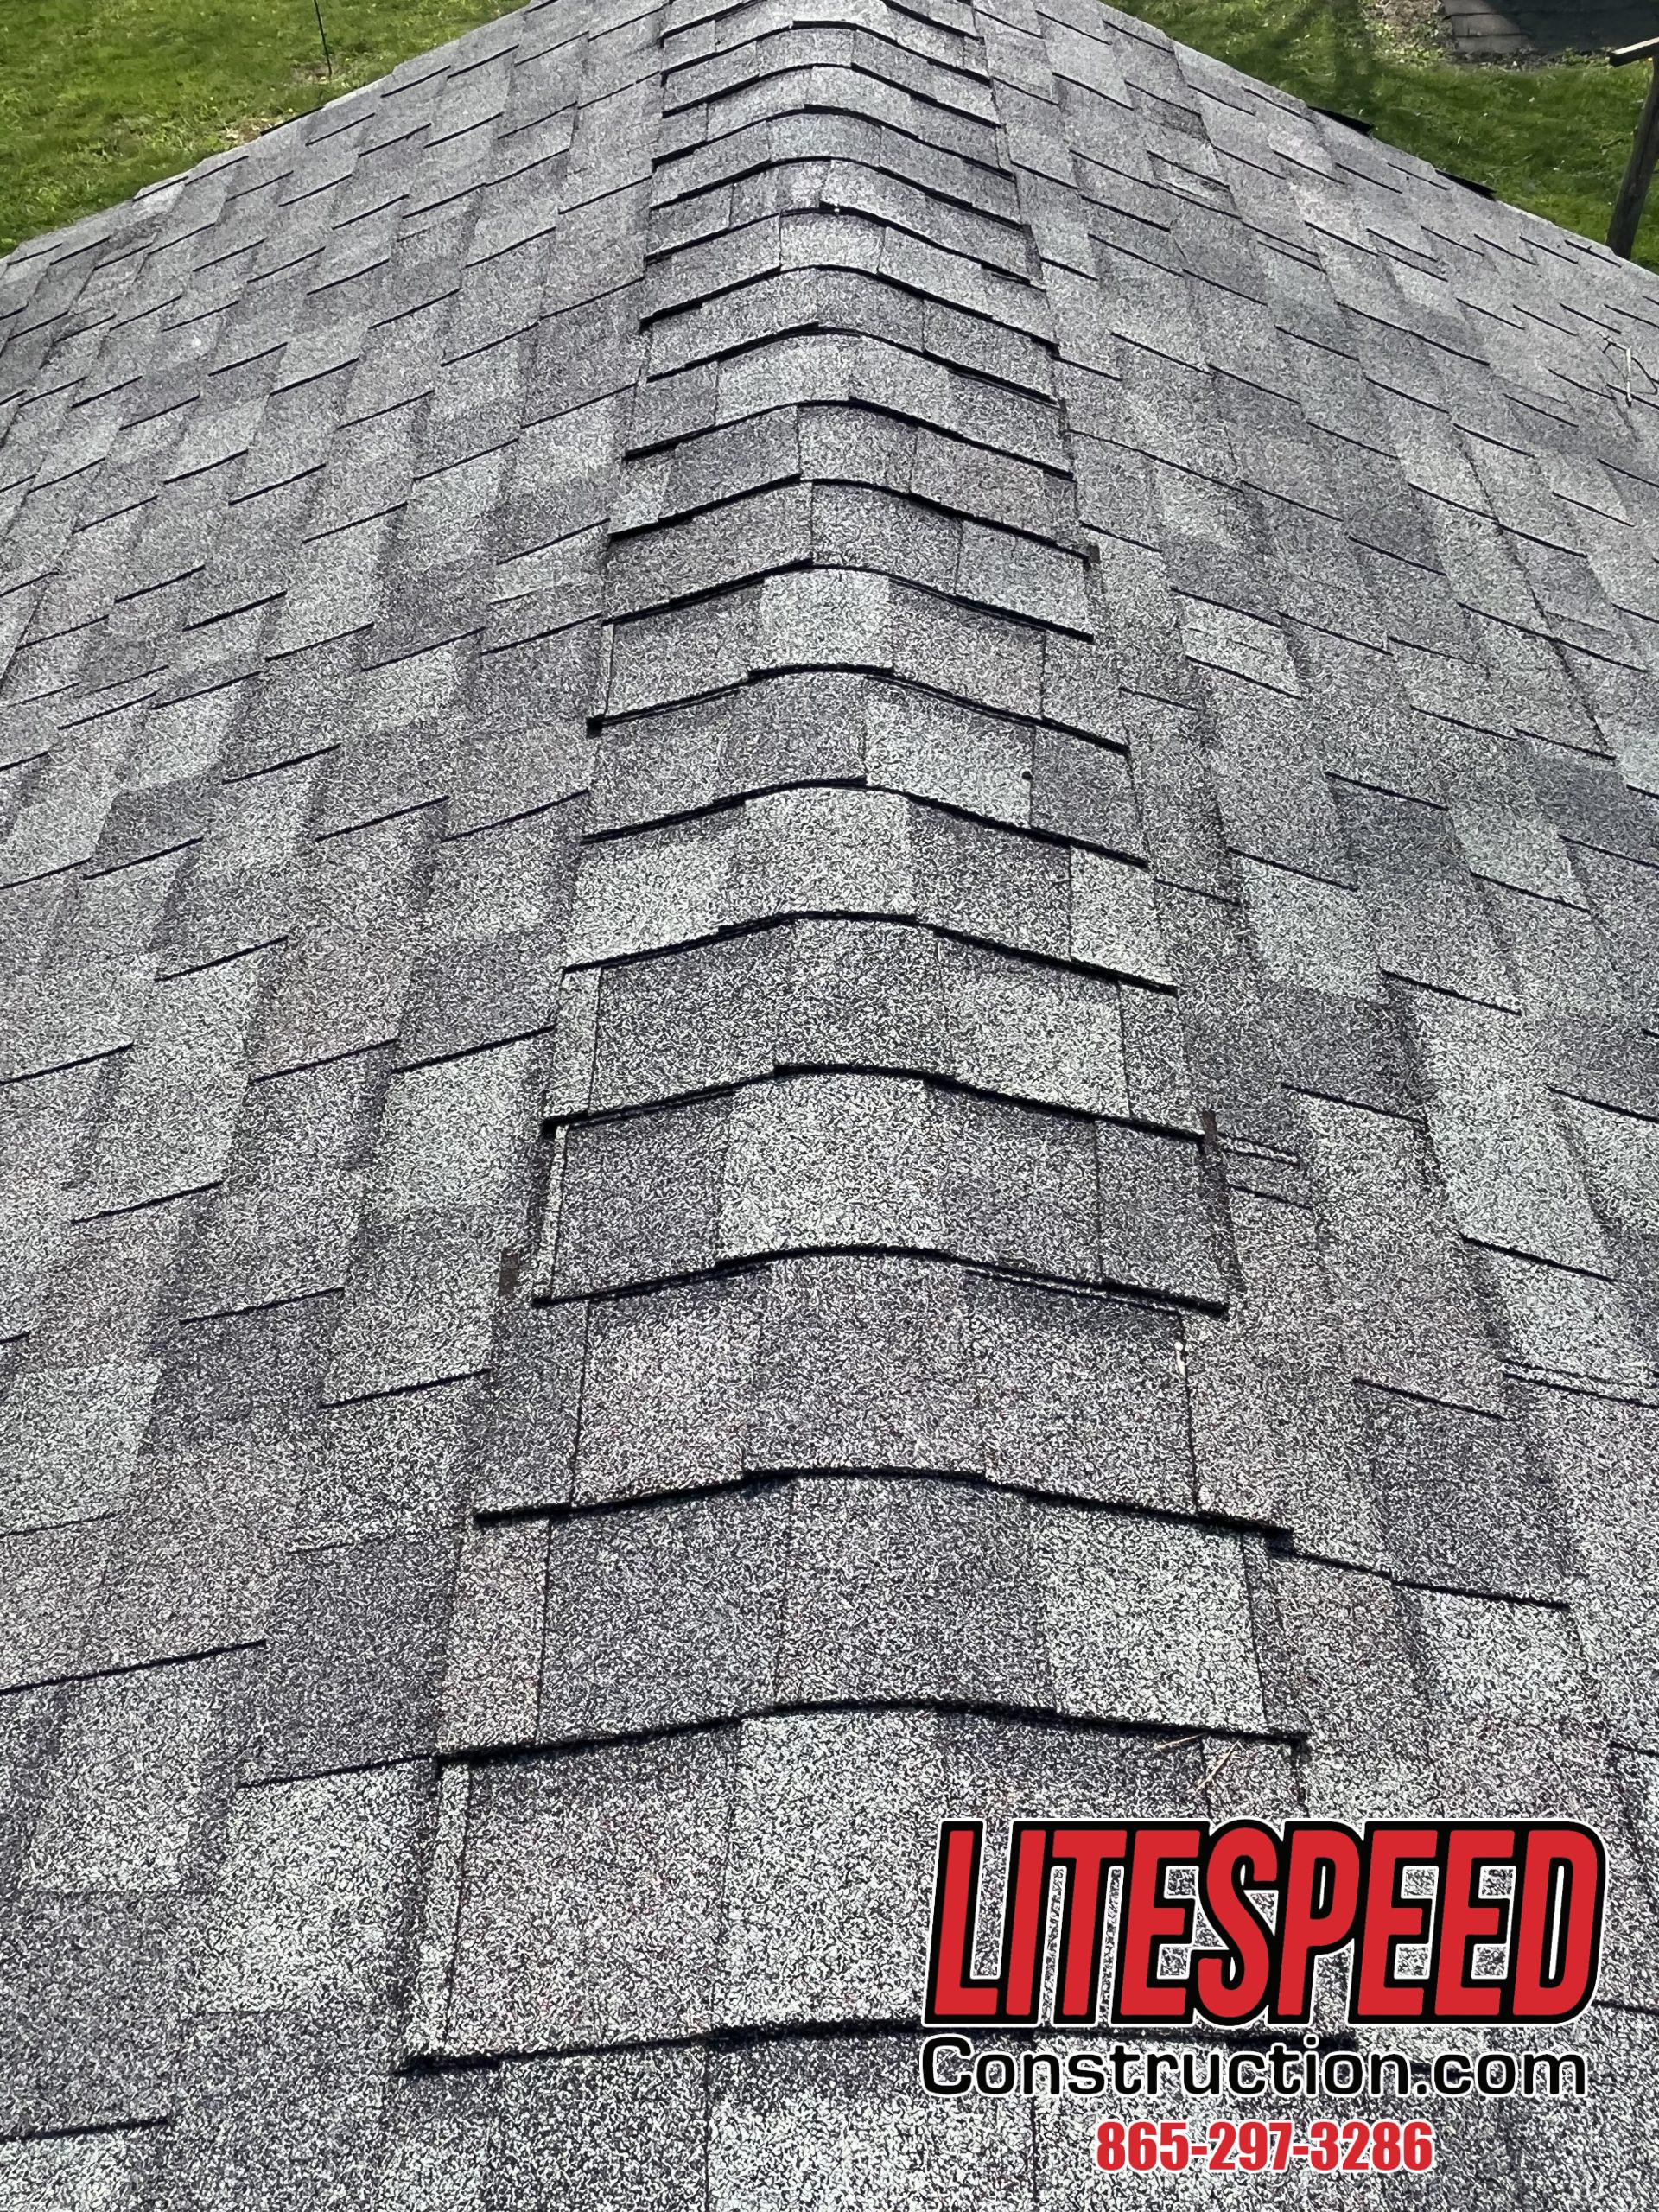 This is a picture of normal shingles used as ridge cap shingles